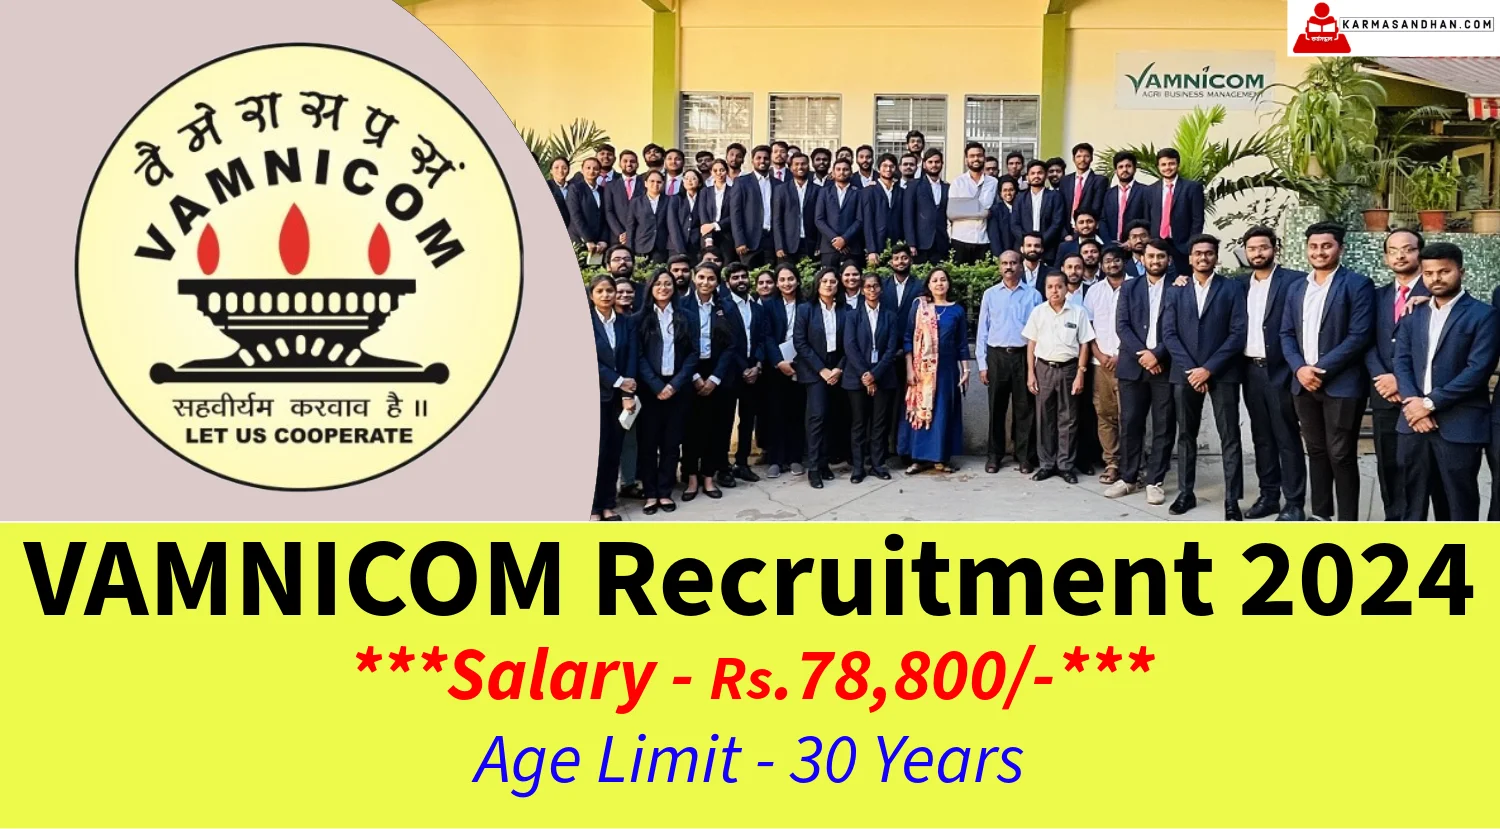 VAMNICOM Recruitment 2024 Notification out for Faculty Posts